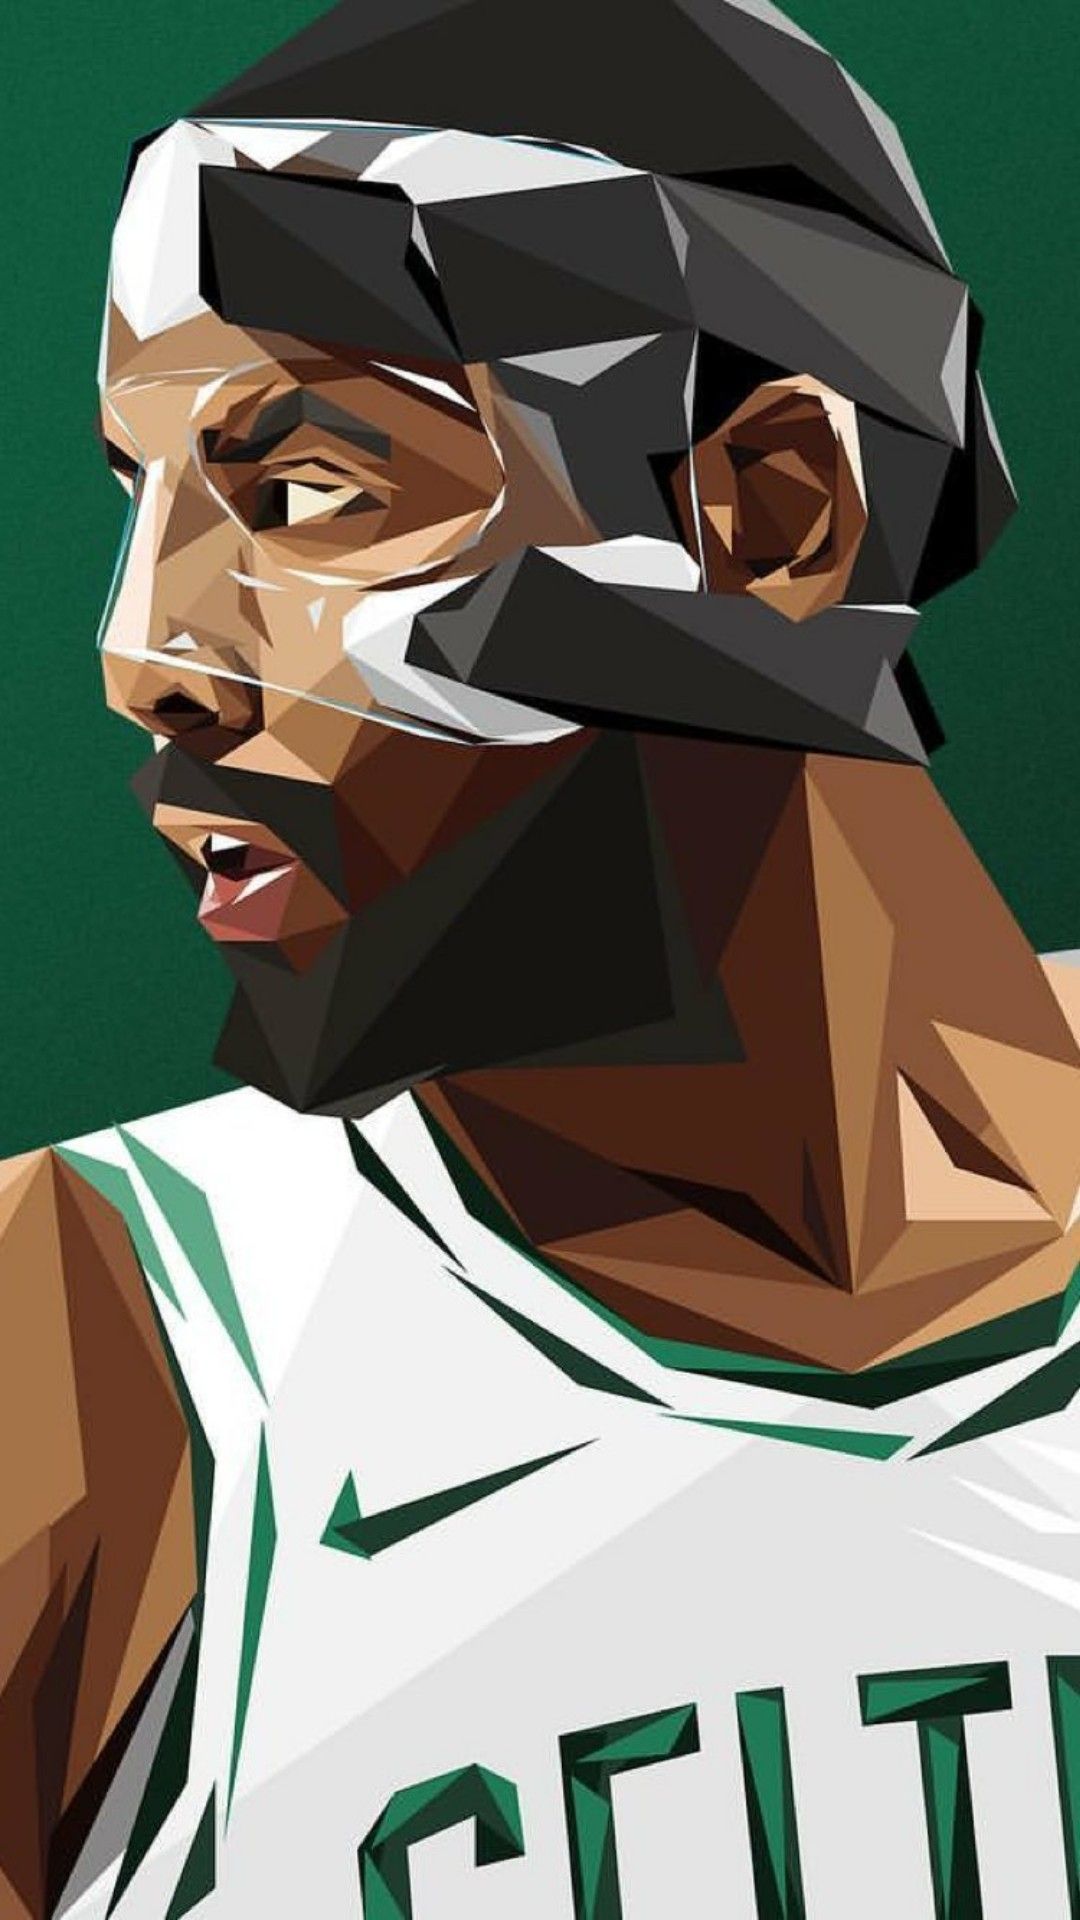 kyrie irving wallpaper iphone 6,fictional character,illustration,art,games